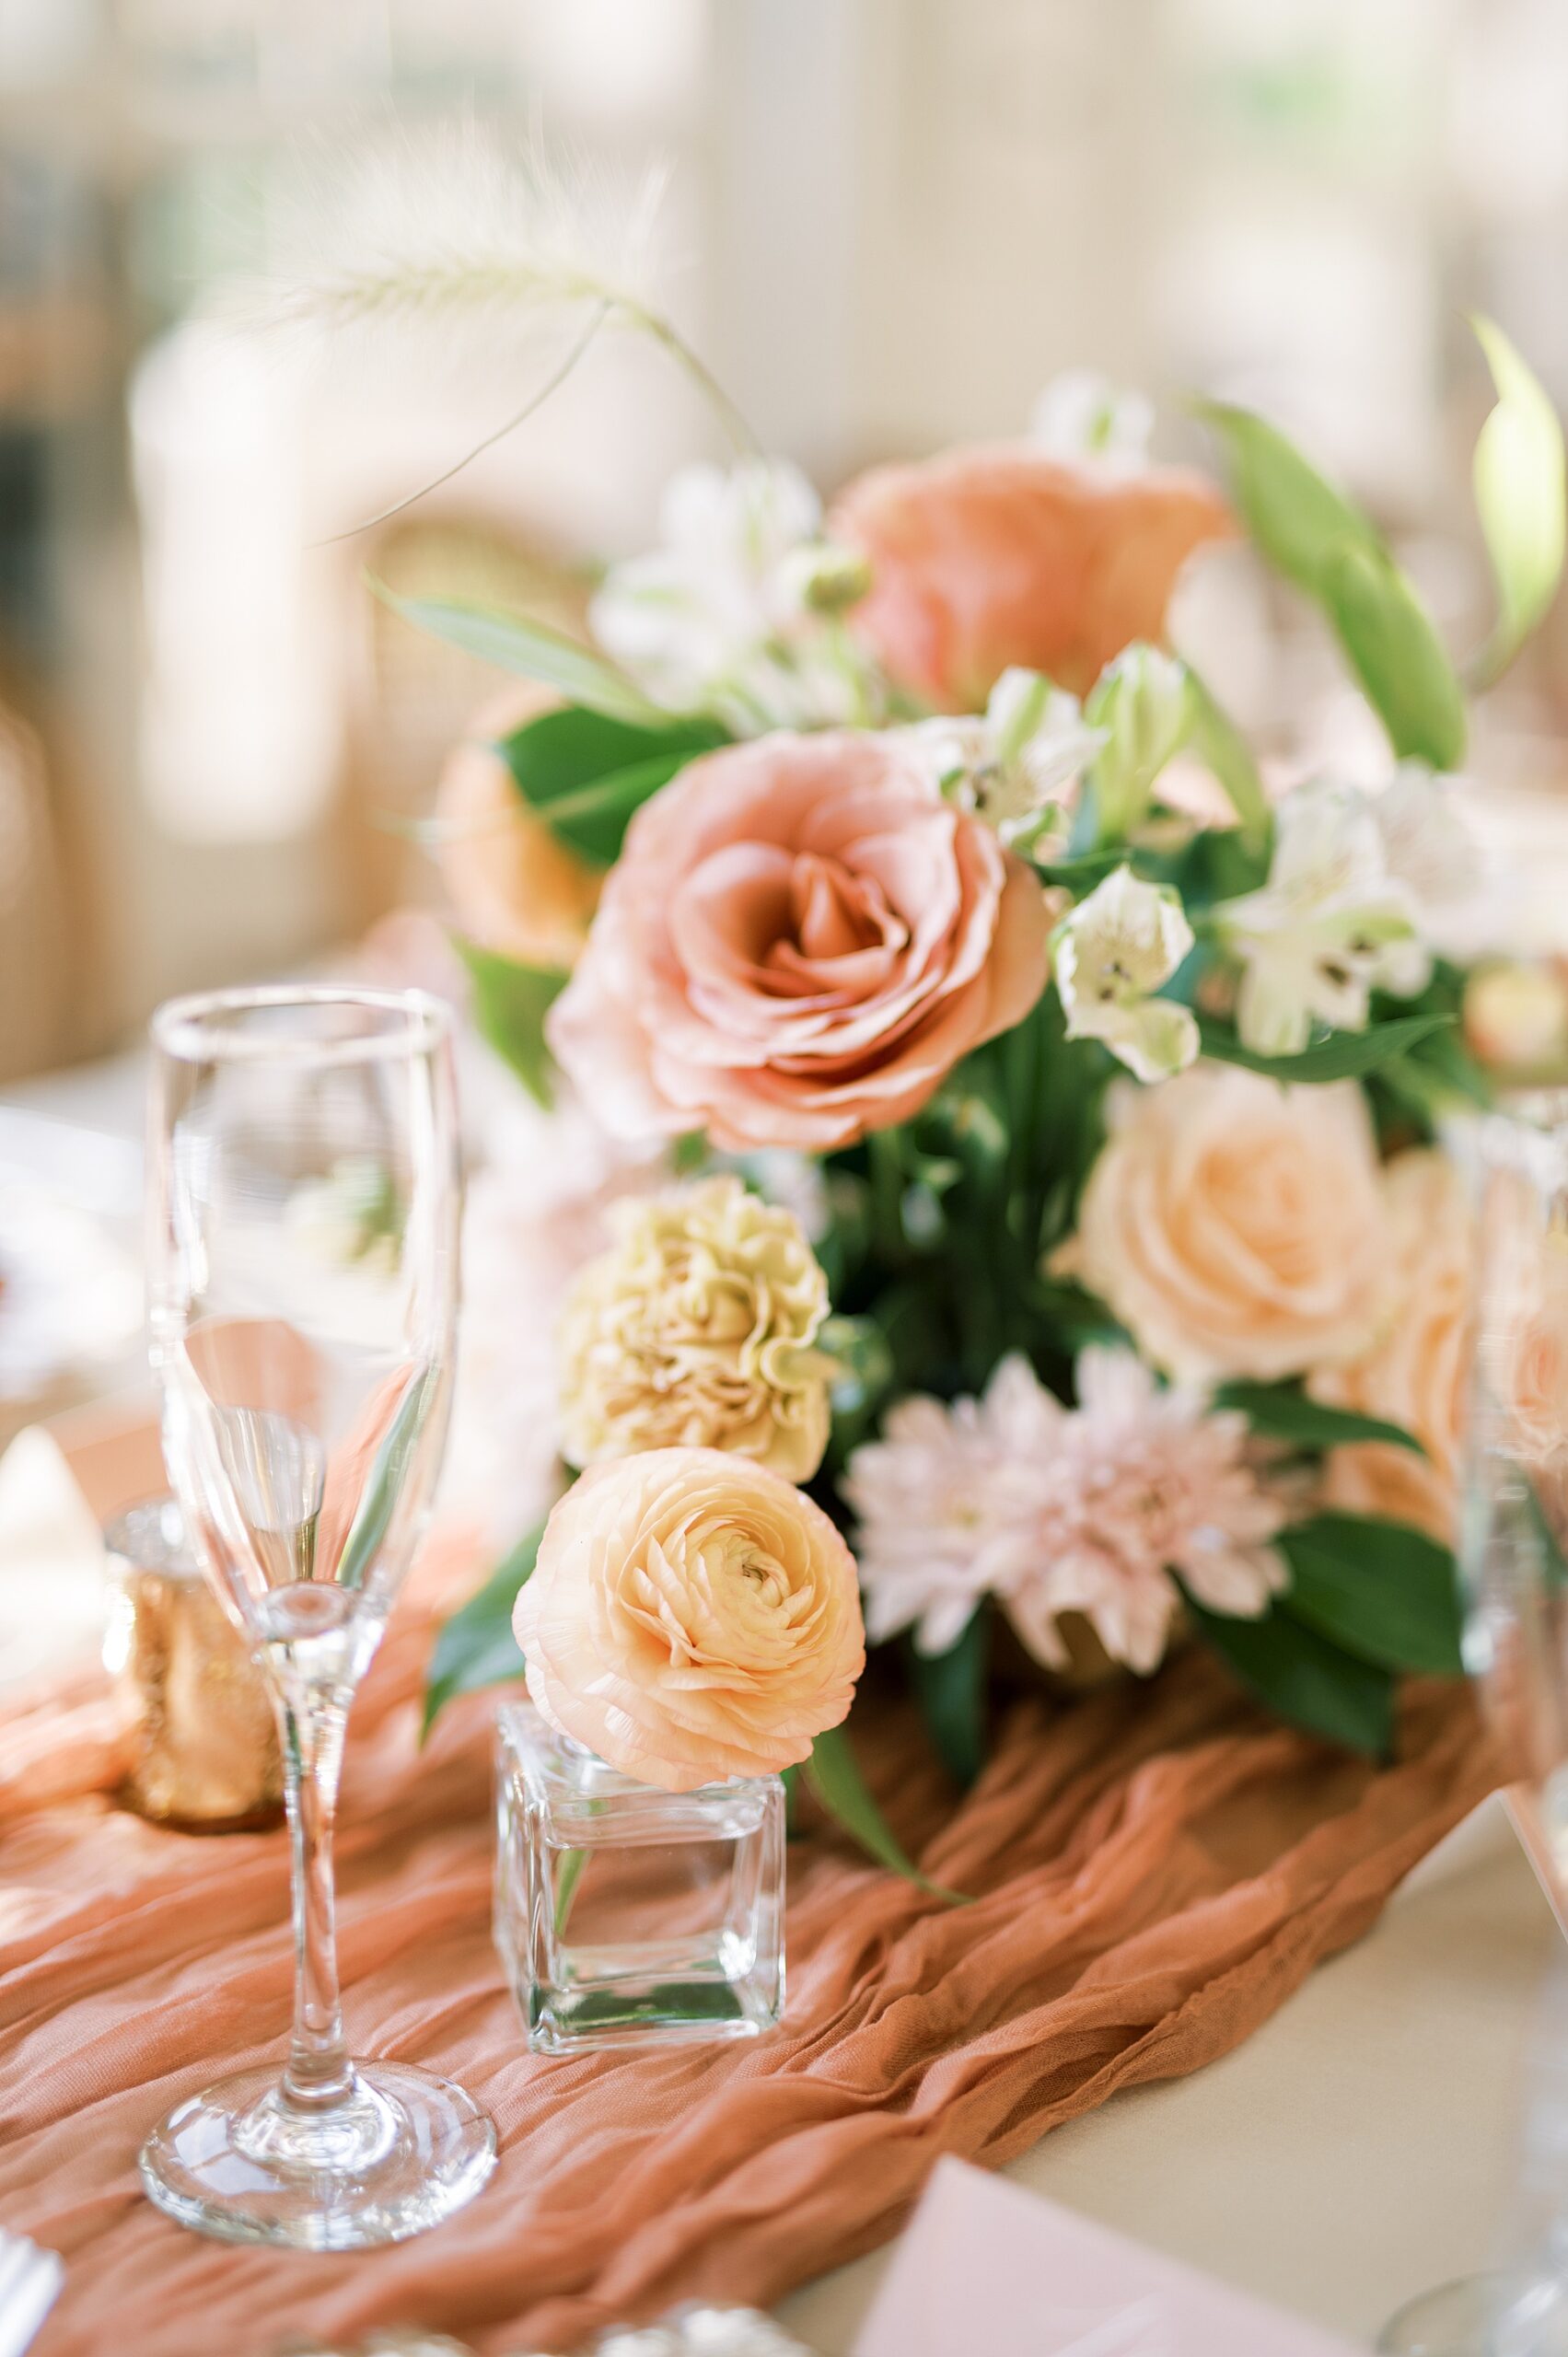 wedding centerpieces of light colored florals